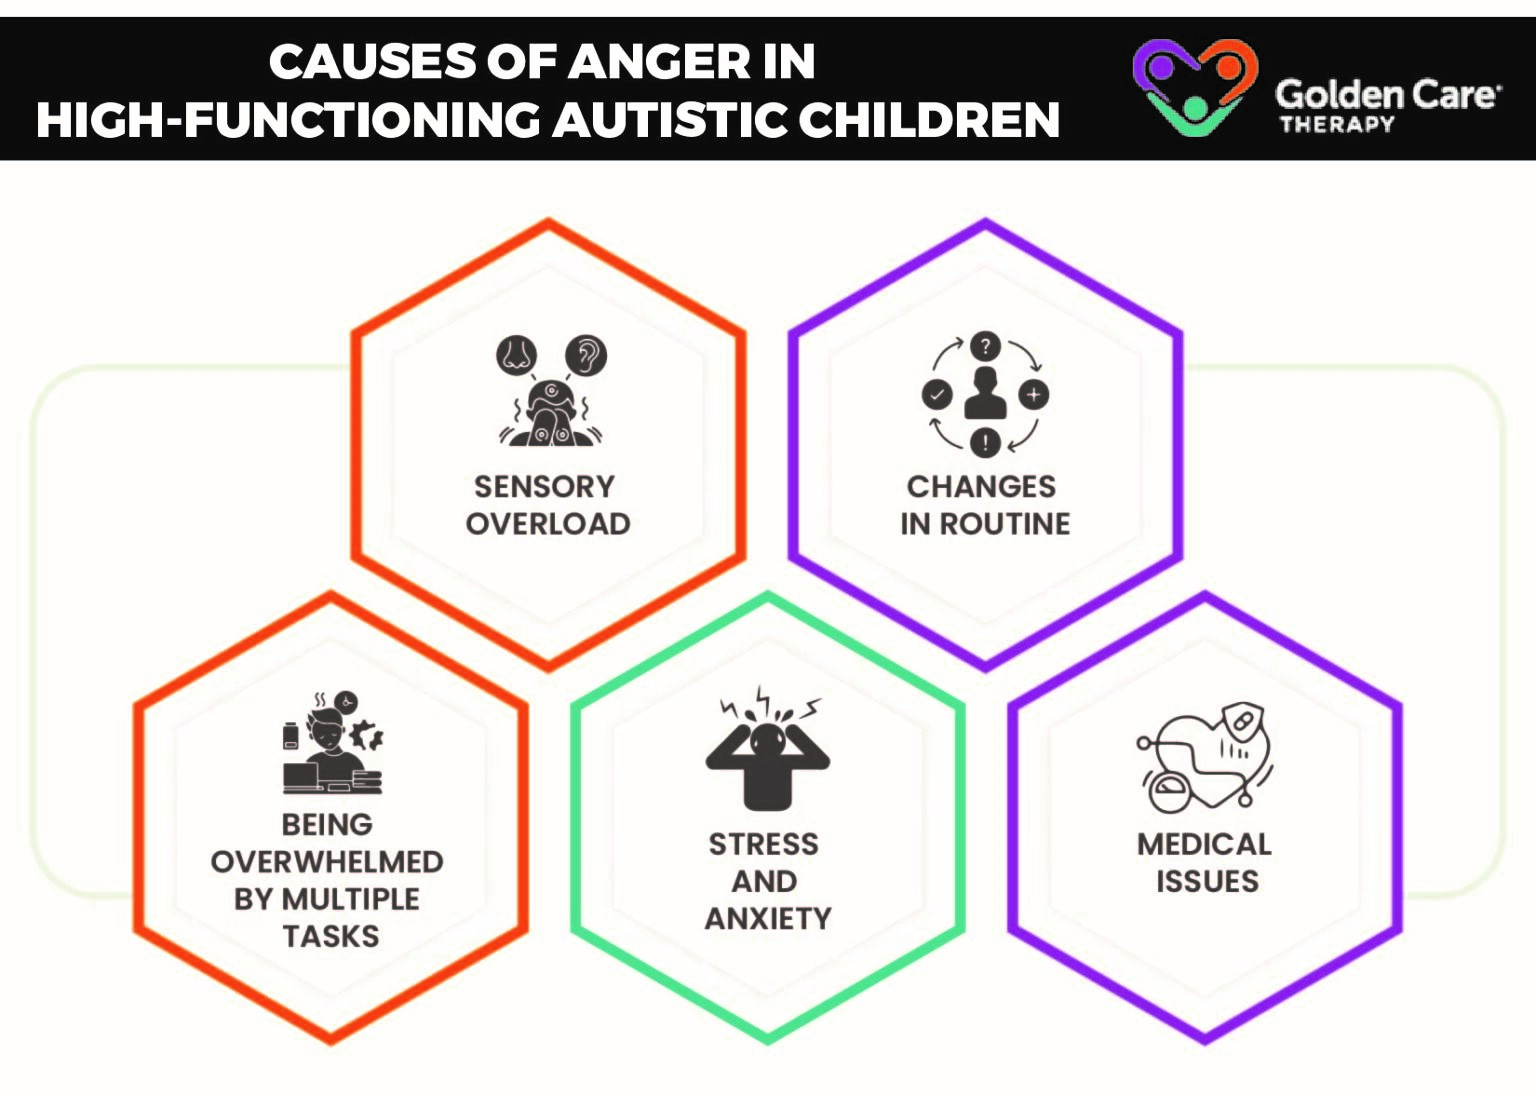 Causes of Anger in High-Functioning Autistic Children